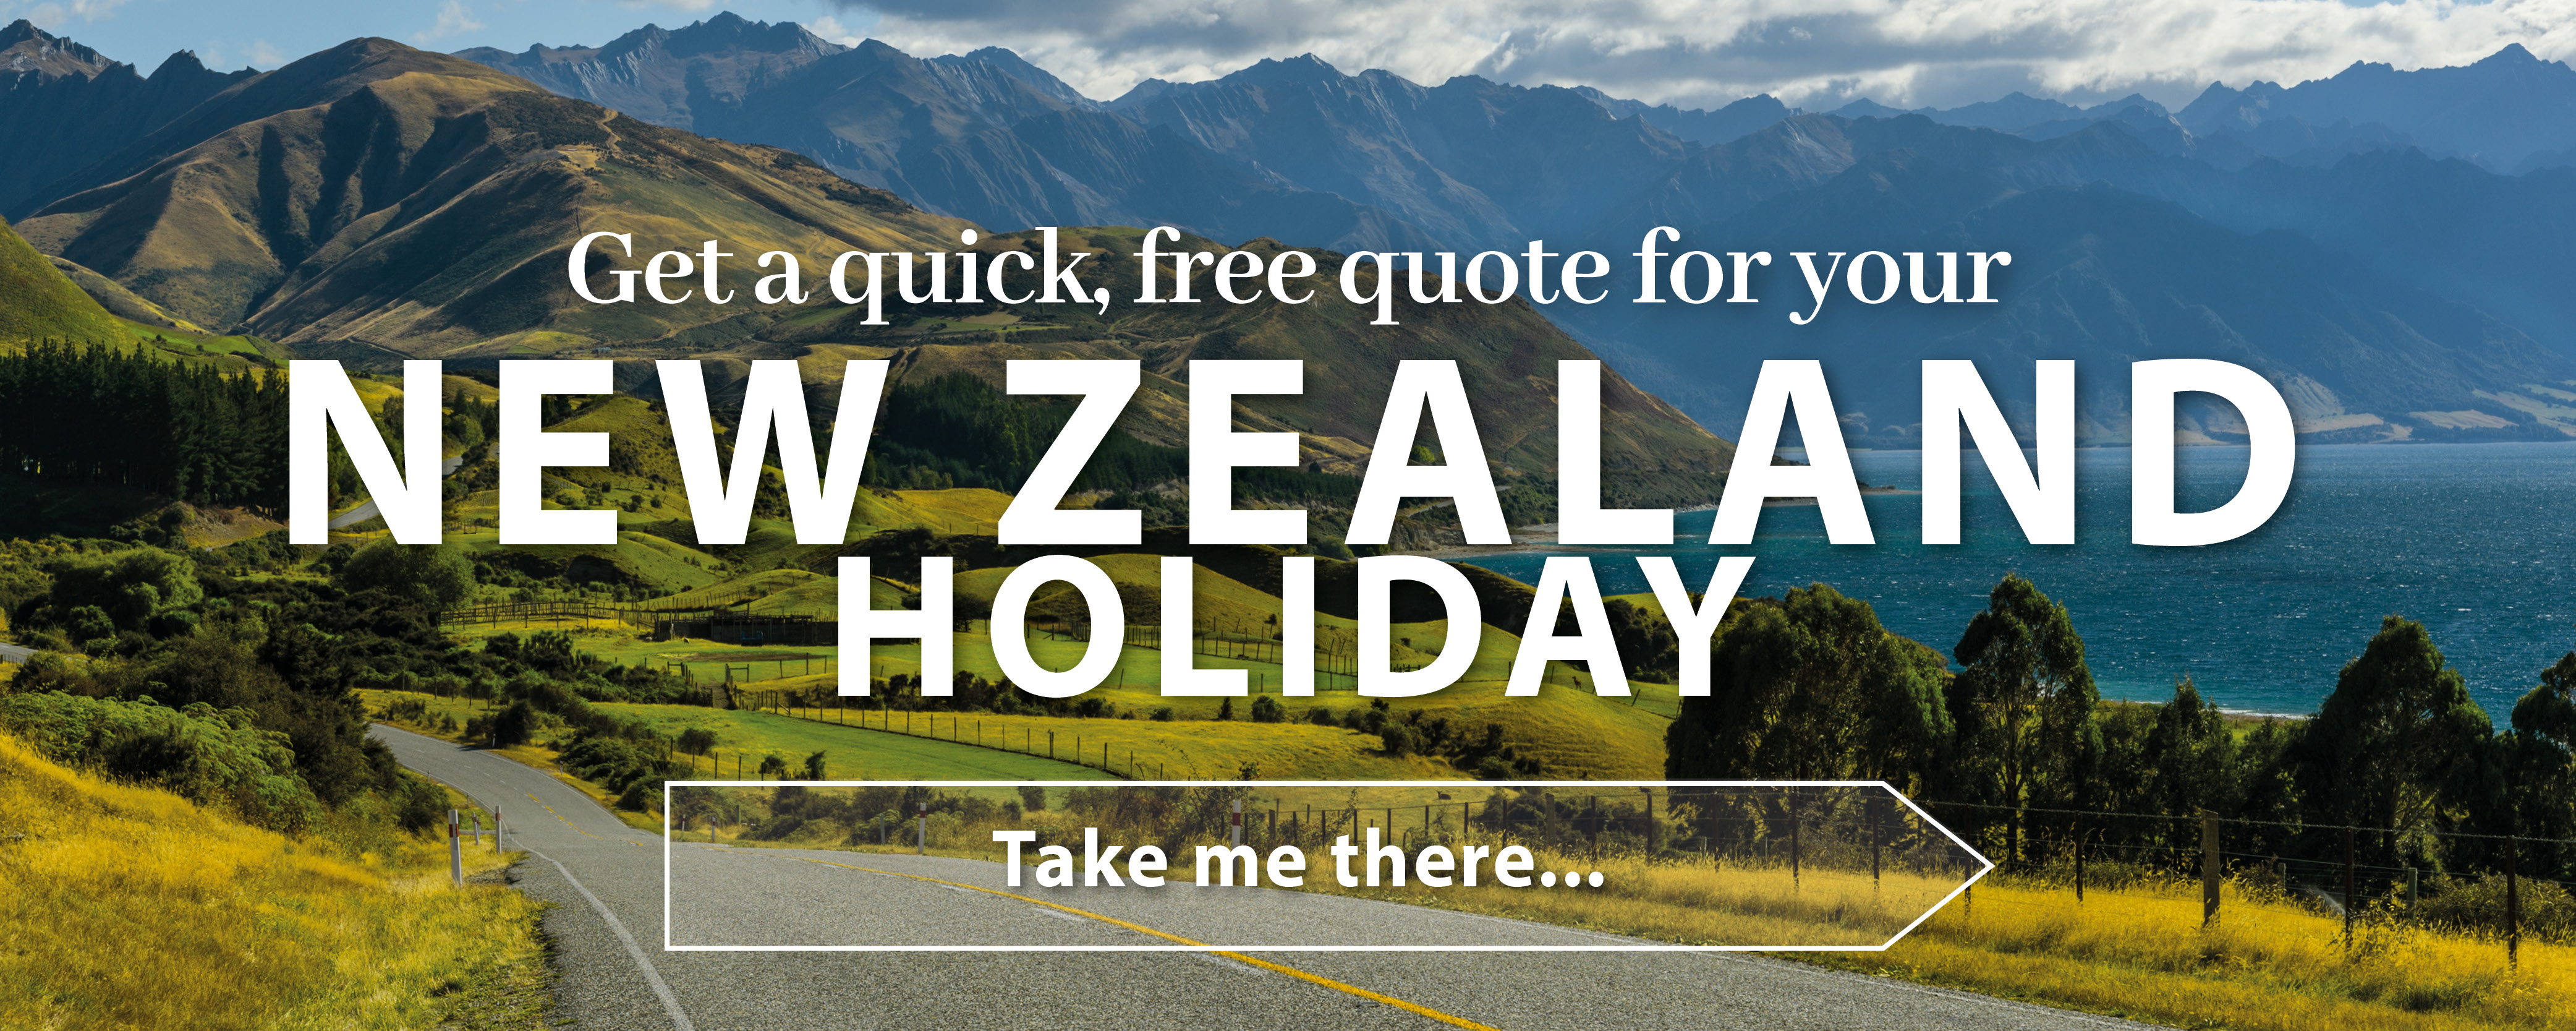 New Zealand Holiday get a quote